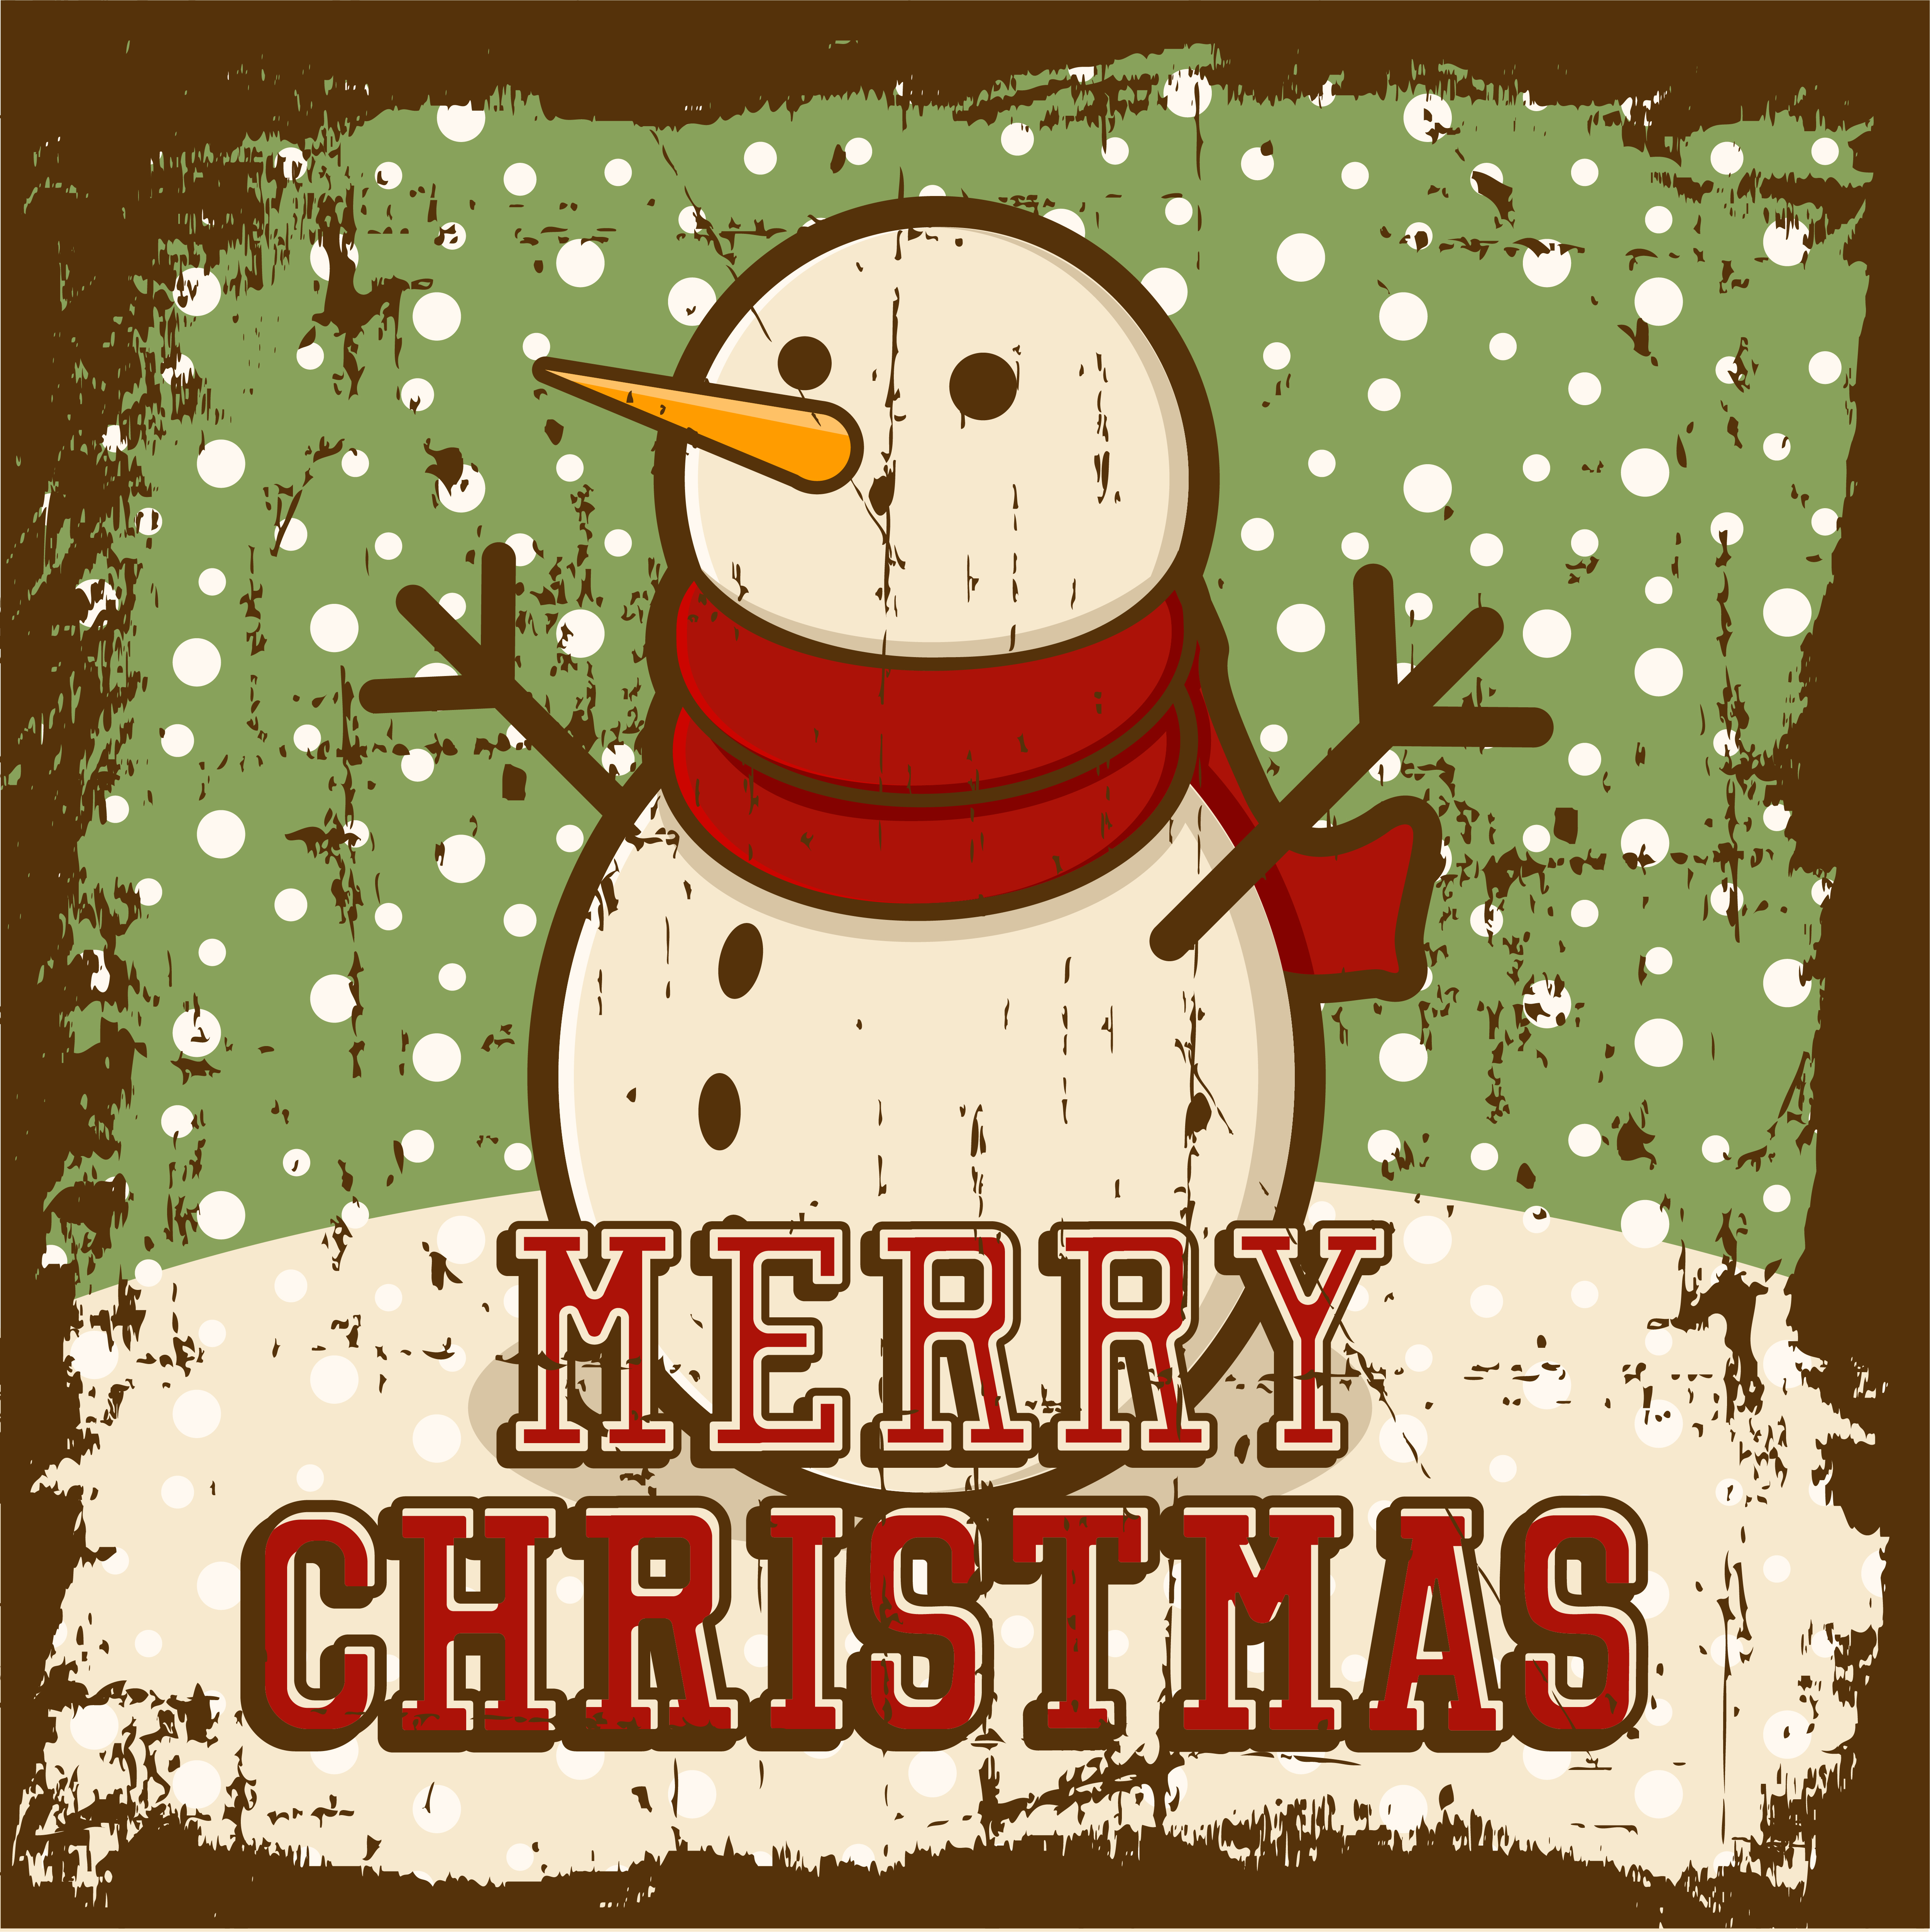 Download Vintage Christmas Card Free Vector Art - (2,708 Free Downloads)